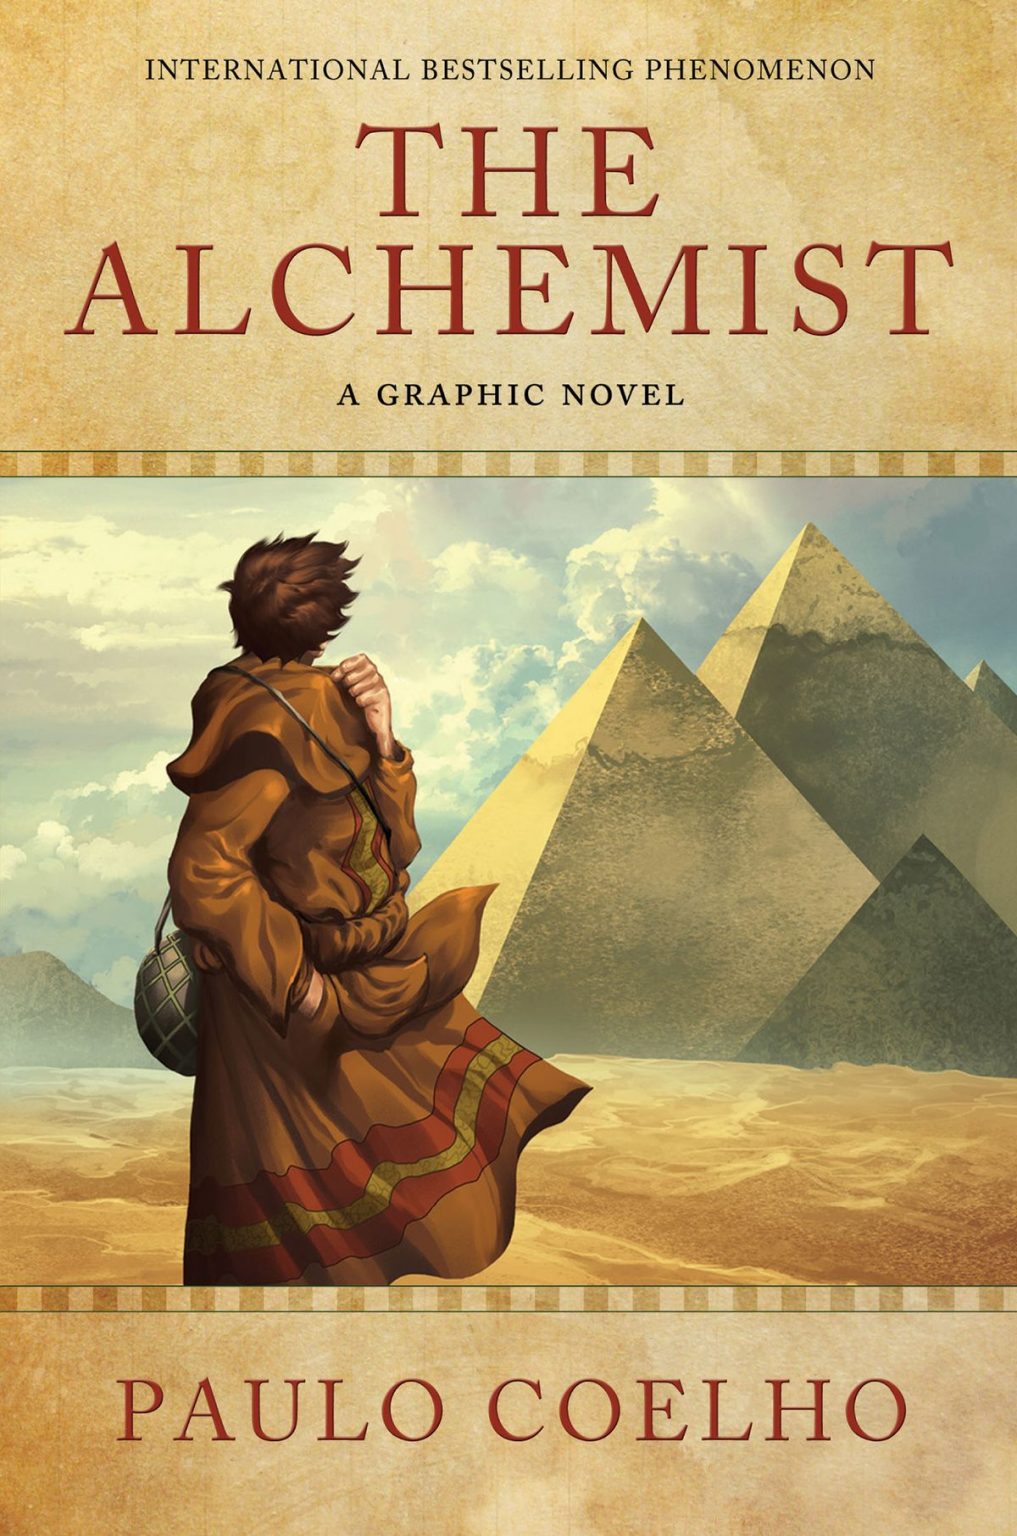 the alchemist book review nytimes